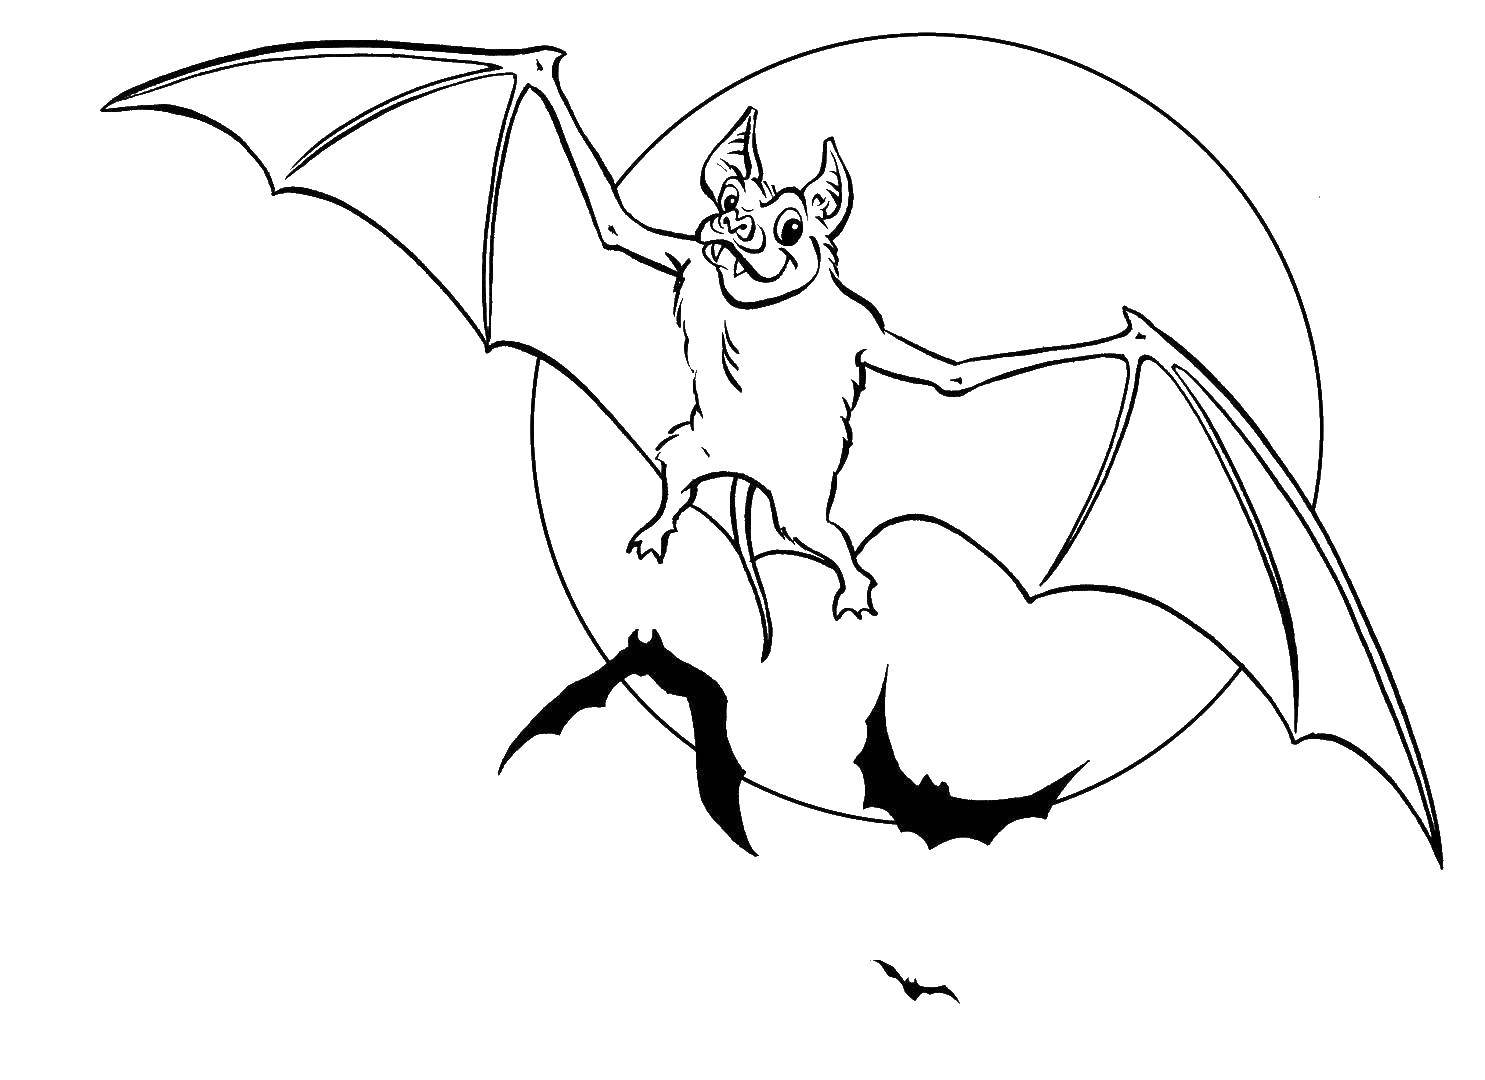 Coloring Bats in the full moon. Category Halloween. Tags:  bat.